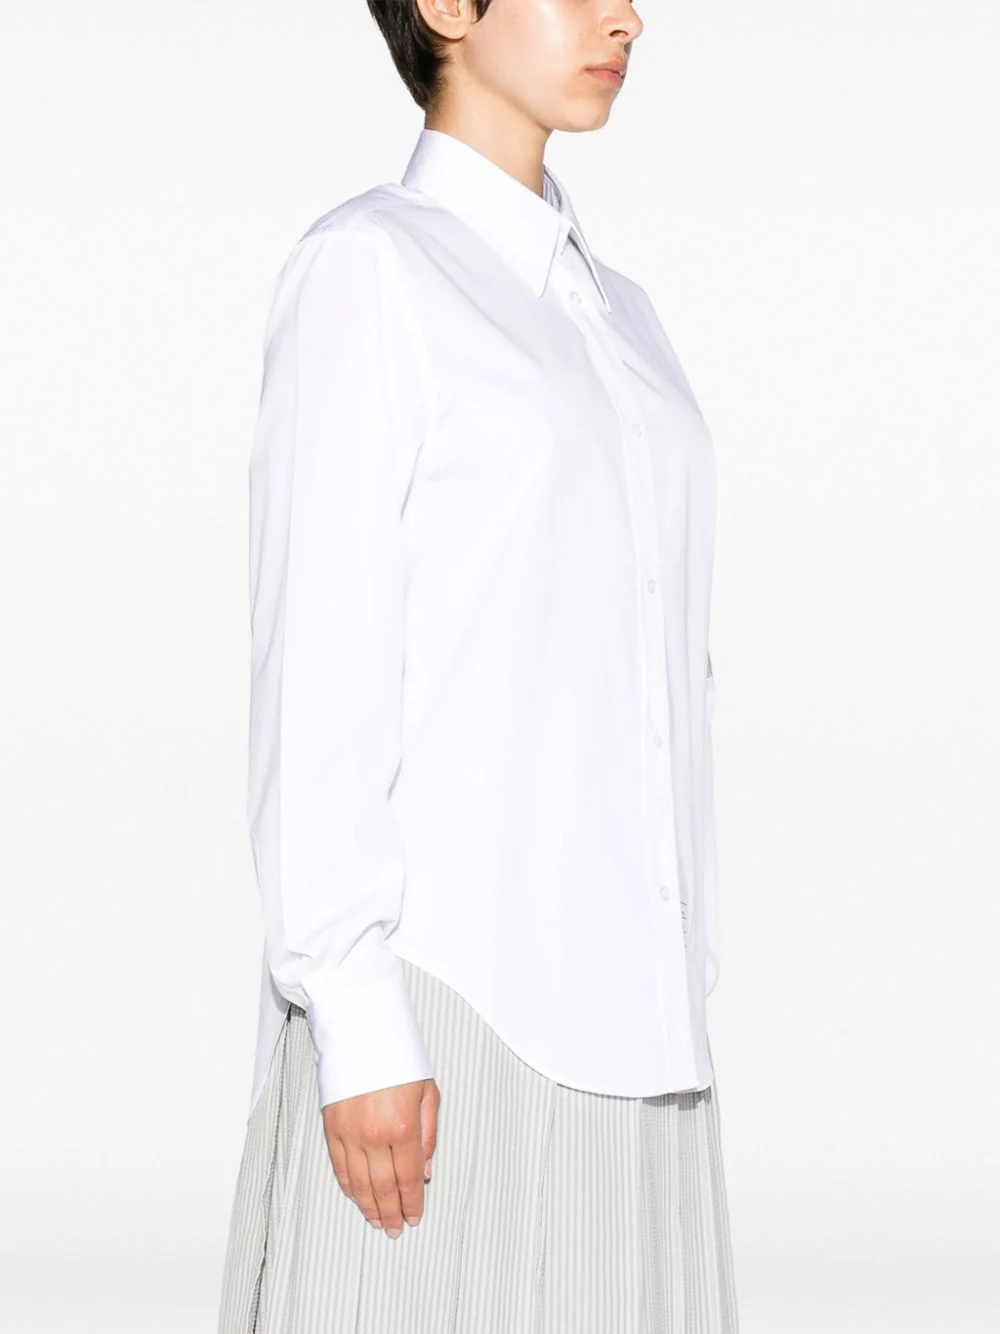 THOM BROWNE Women Easy Fit Point Collar Shirt W/ Combo Top Applied 4 Bar In Solid Poplin